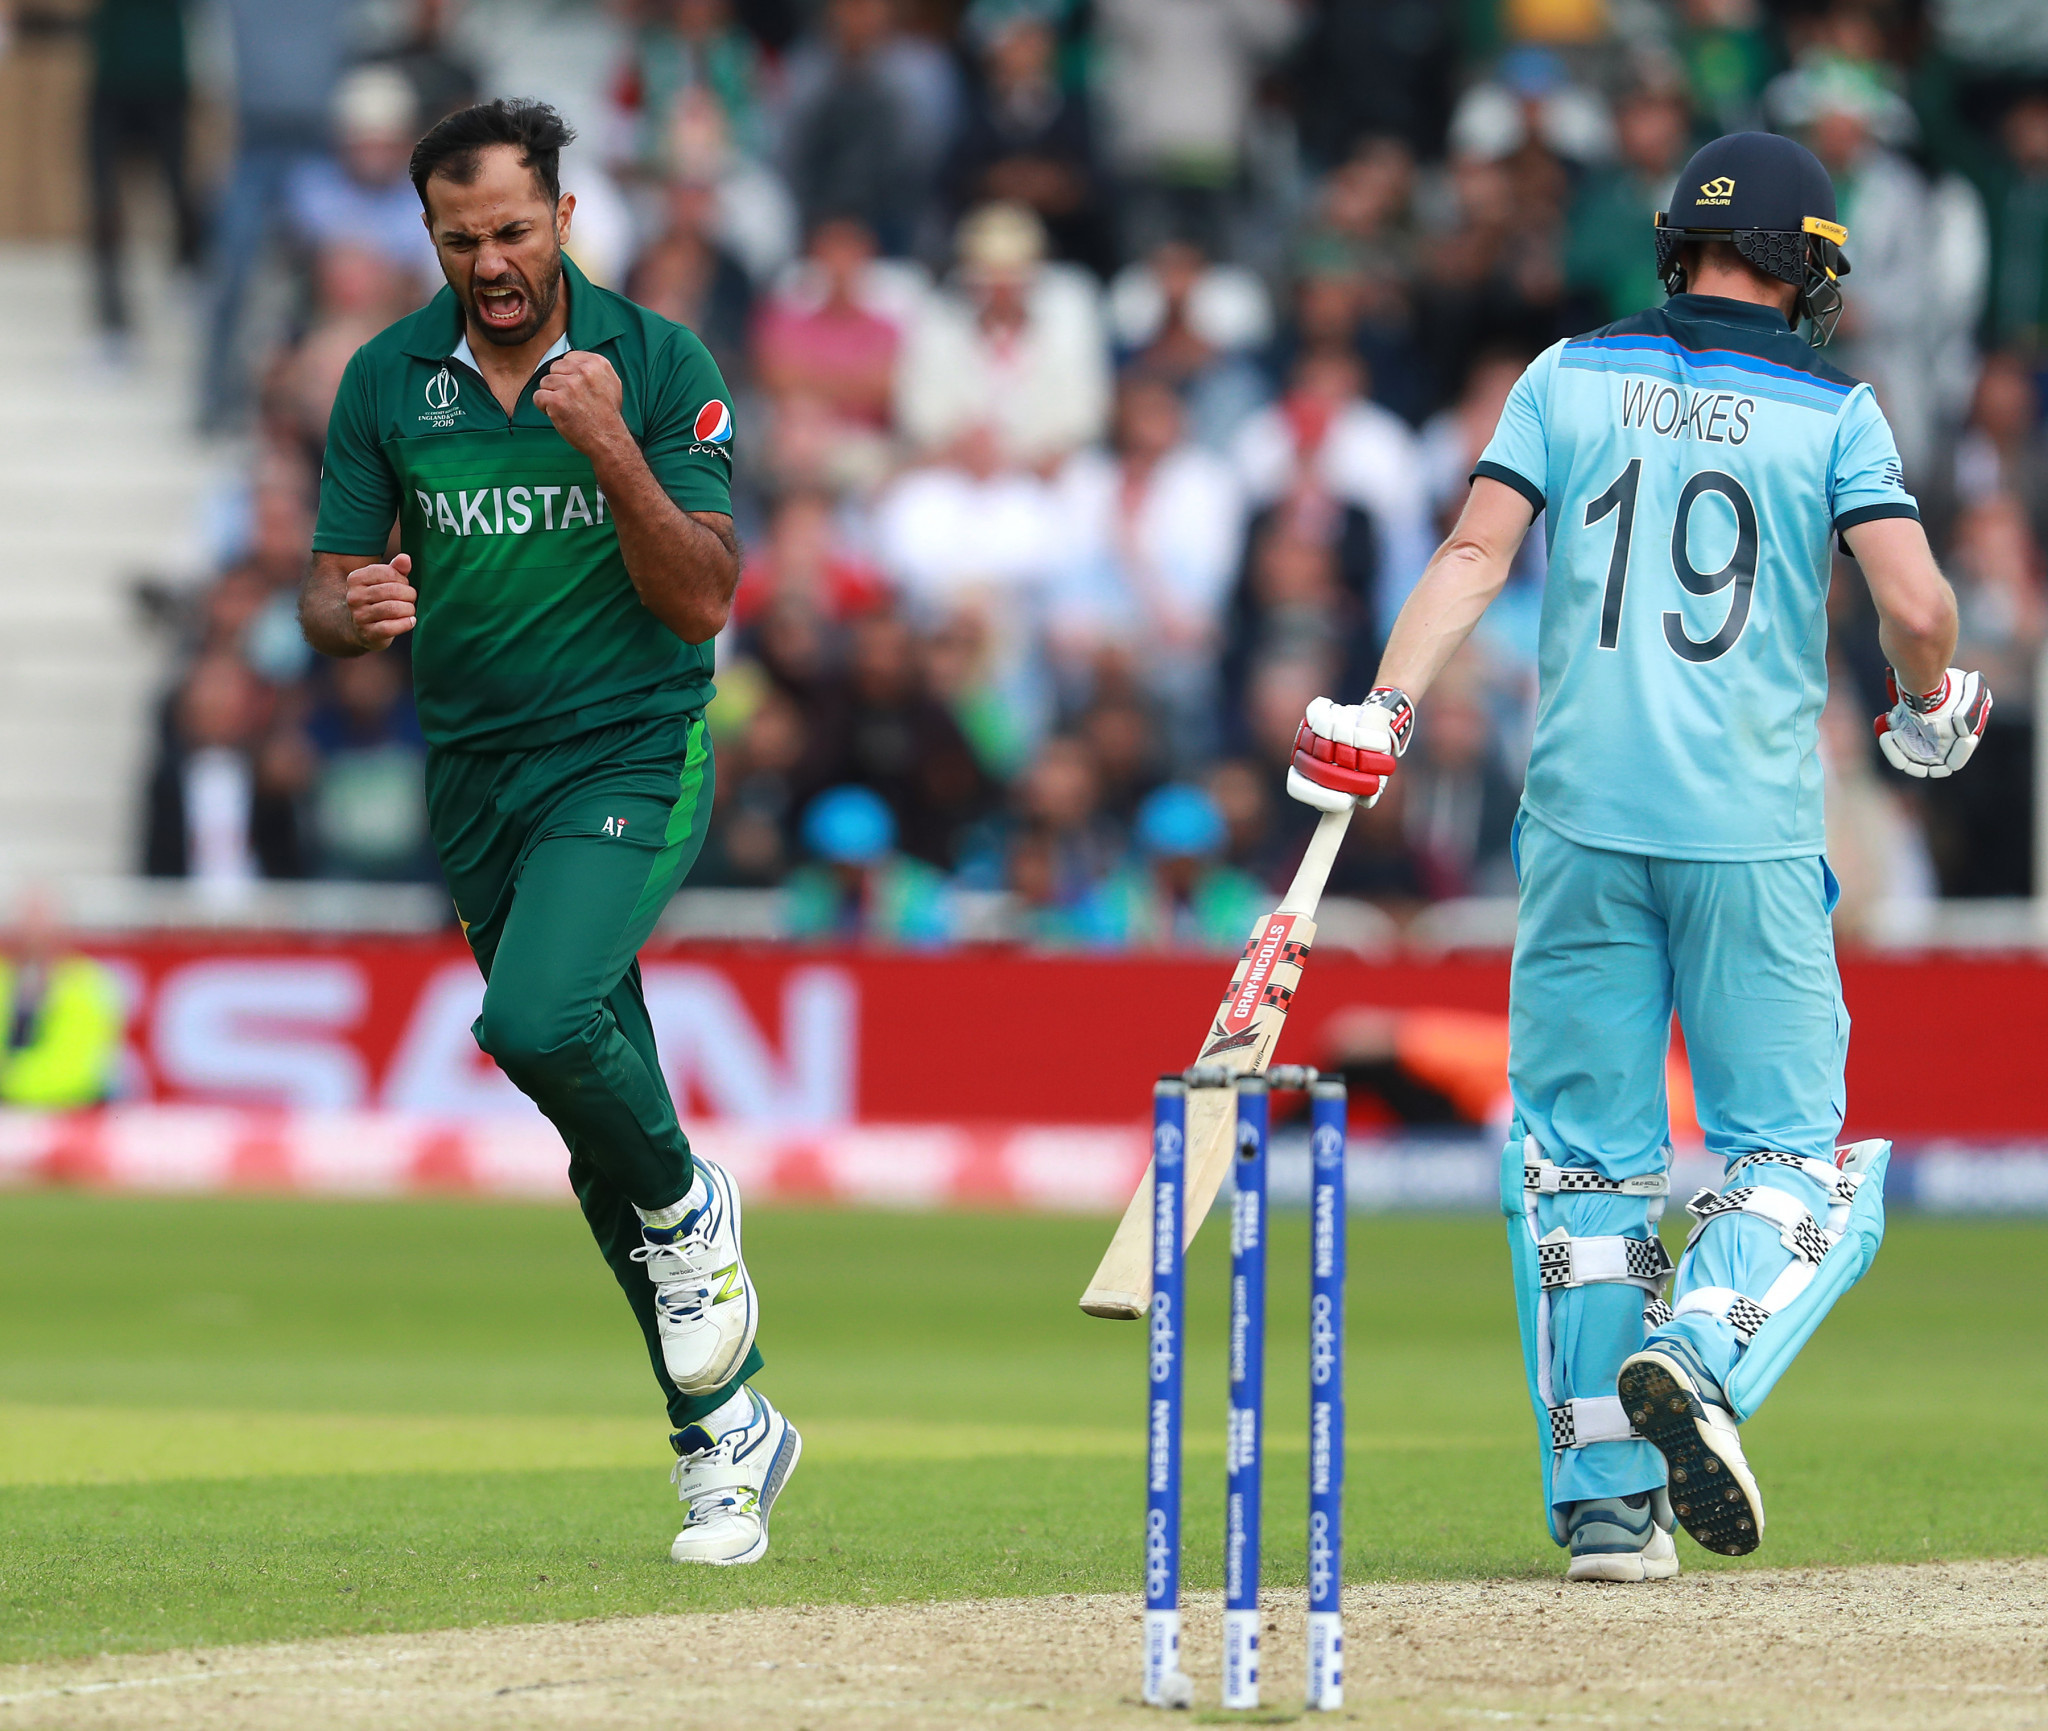 Pakistan stun favourites and hosts England at Cricket World Cup